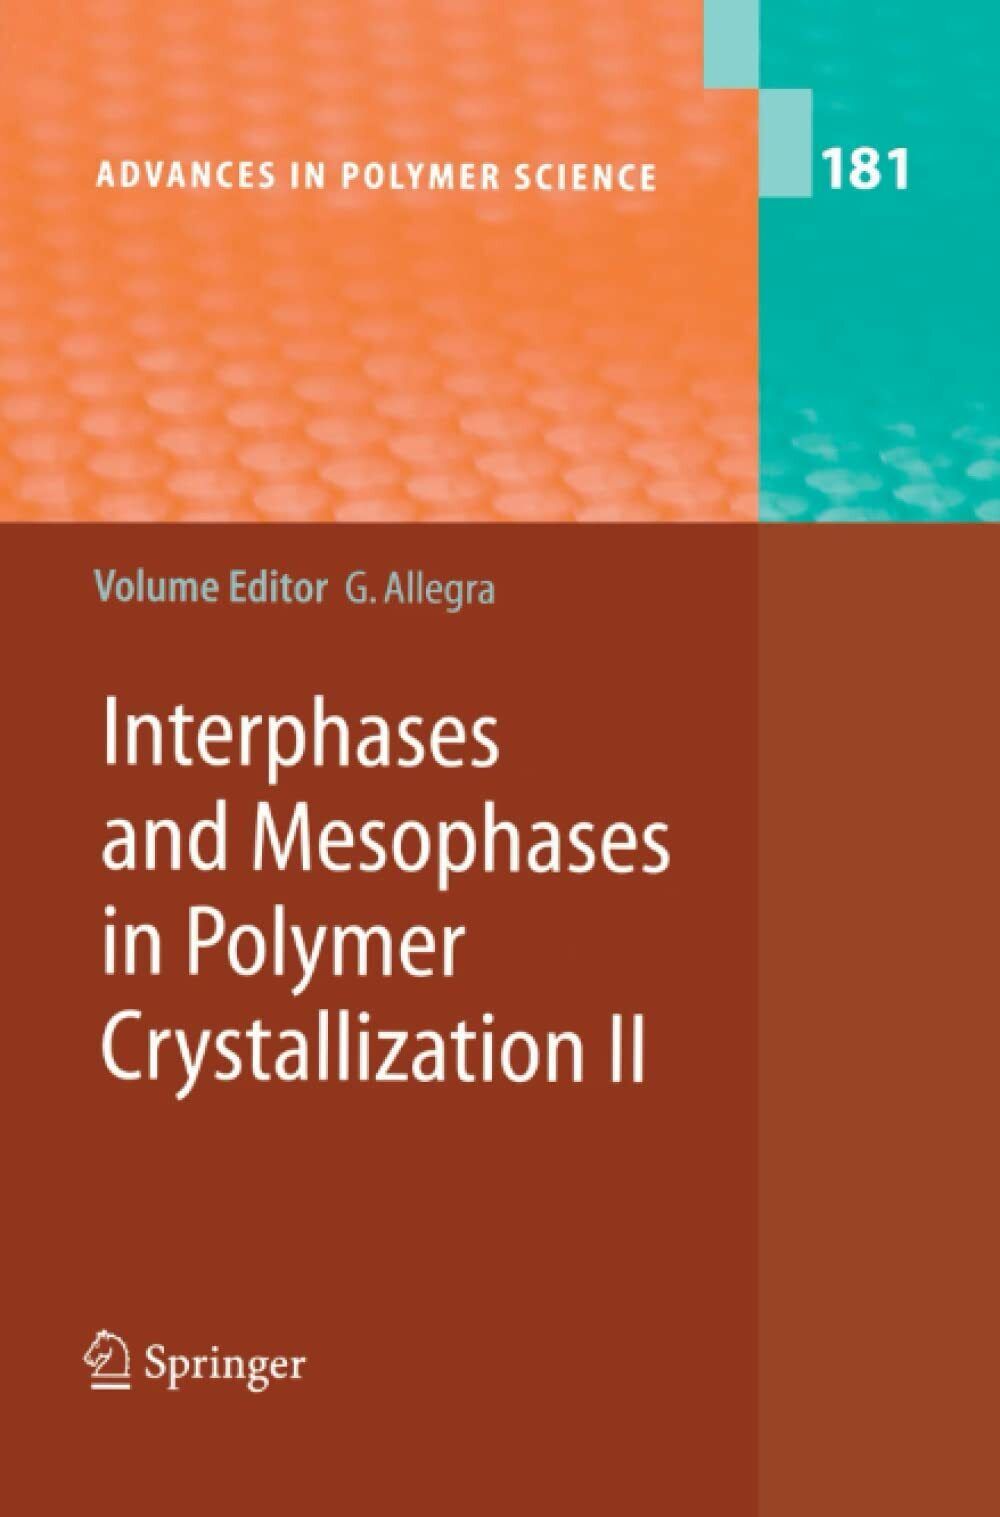 Interphases and Mesophases in Polymer Crystallization II -Giuseppe Allegra-2010